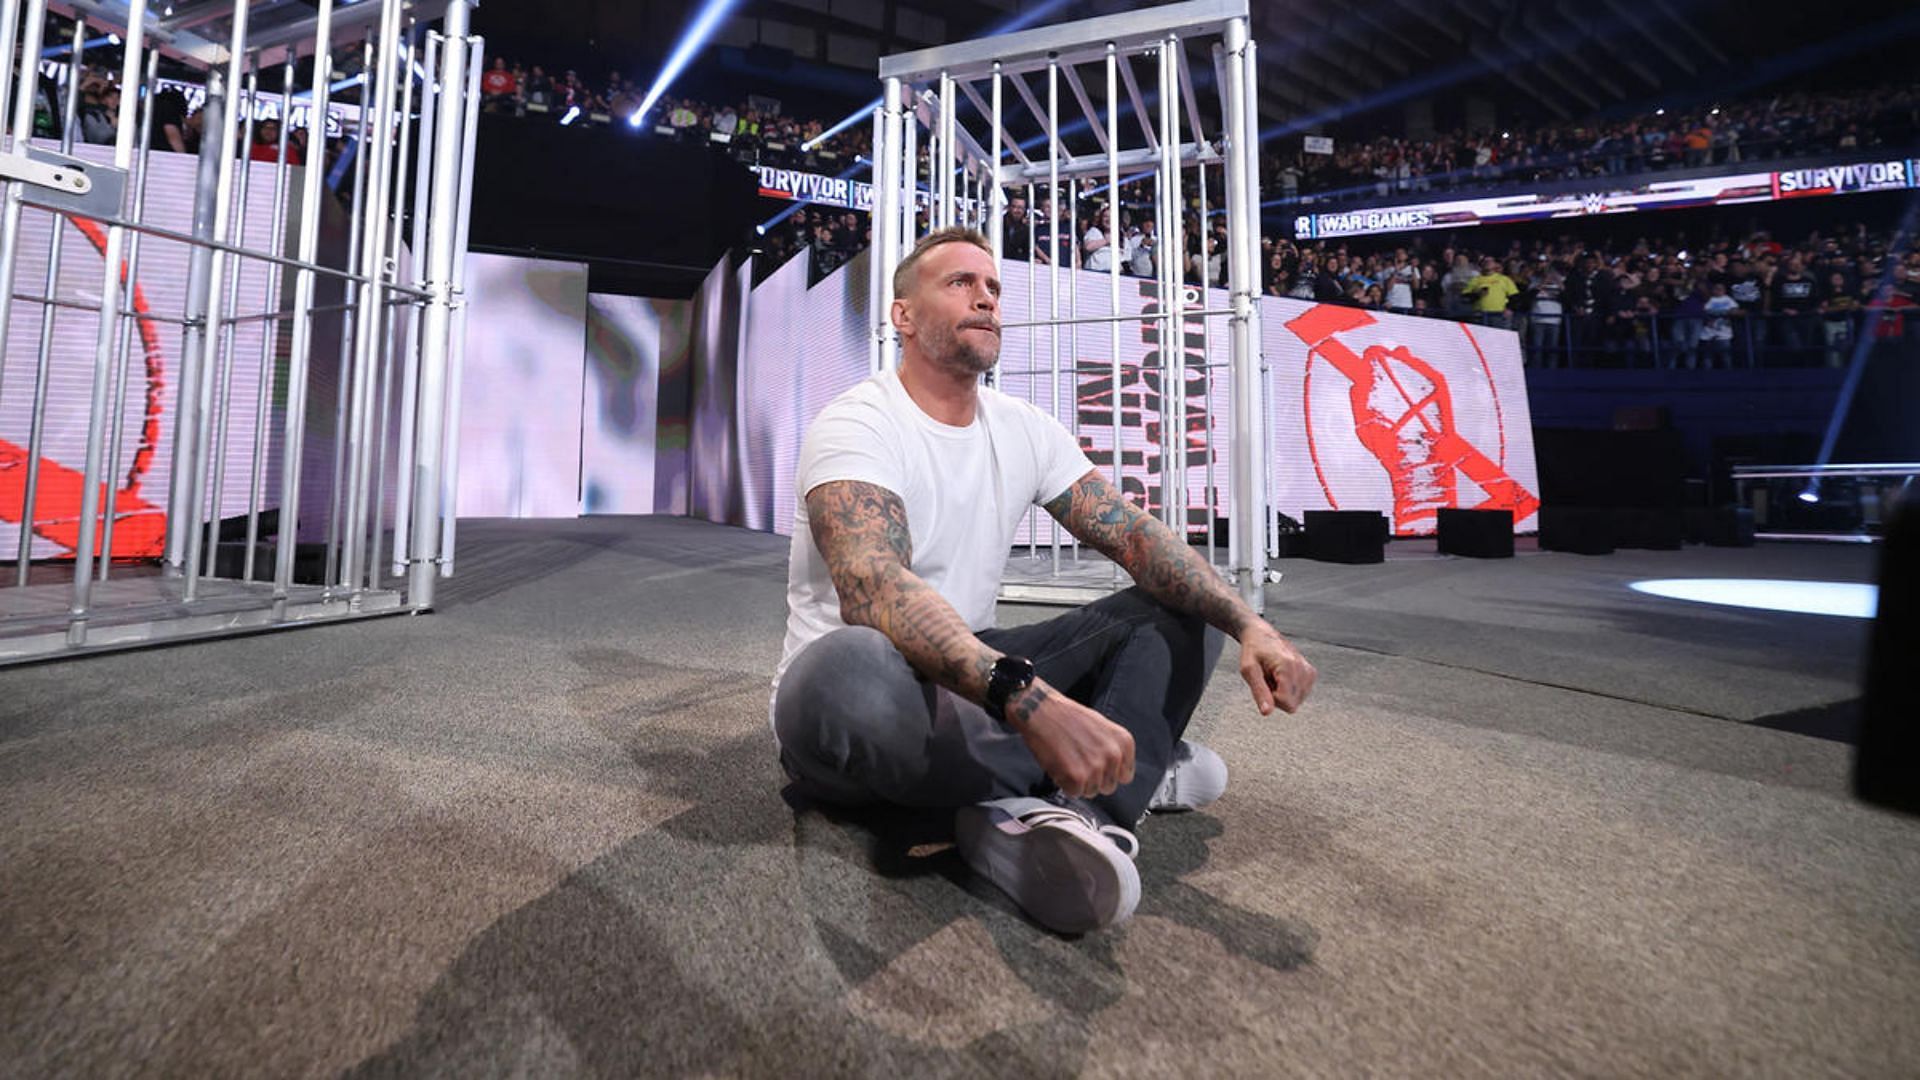 What is next for CM Punk in WWE?